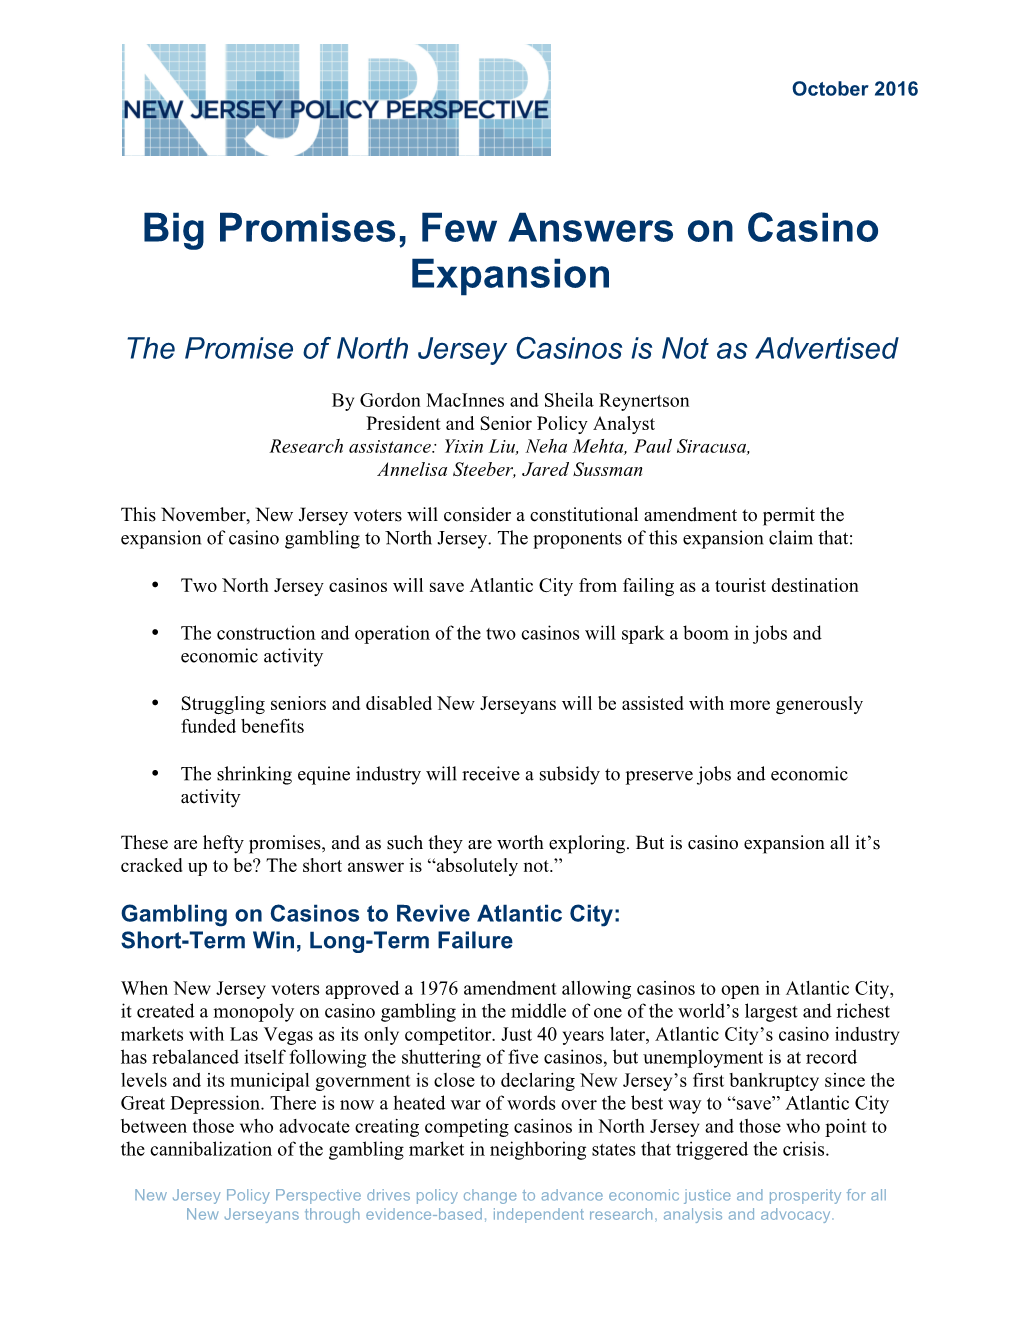 Big Promises, Few Answers on Casino Expansion